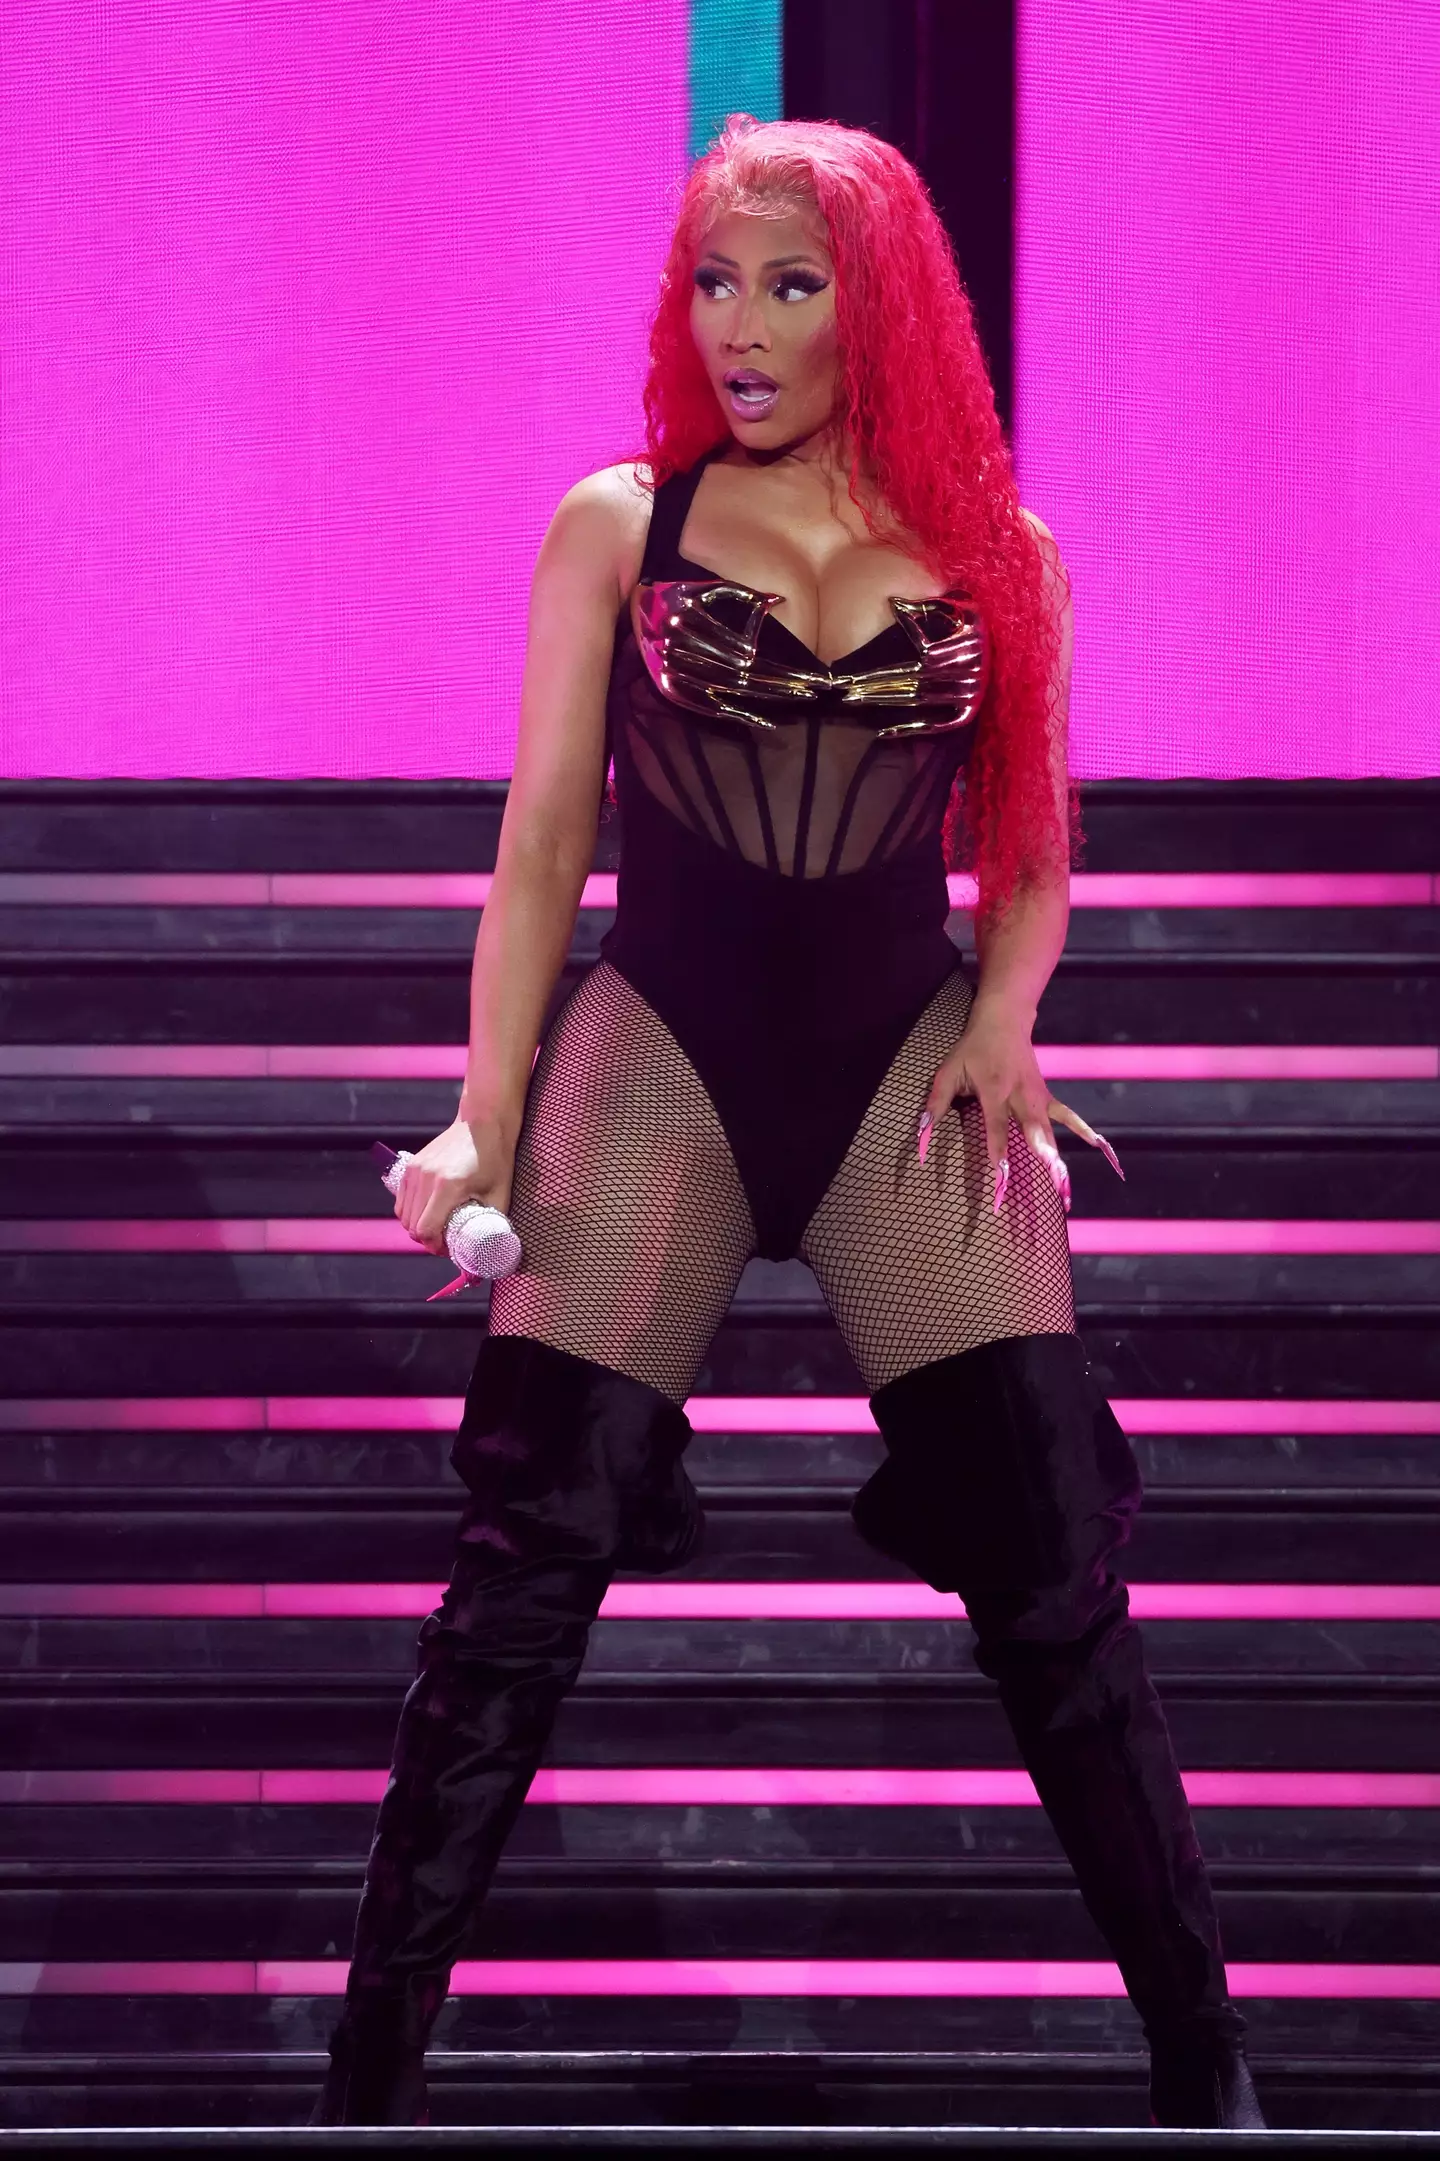 Nicki Minaj seemingly addressed the chaotic weekend after arriving in Birmingham (Kevin Mazur/Getty Images for Live Nation)